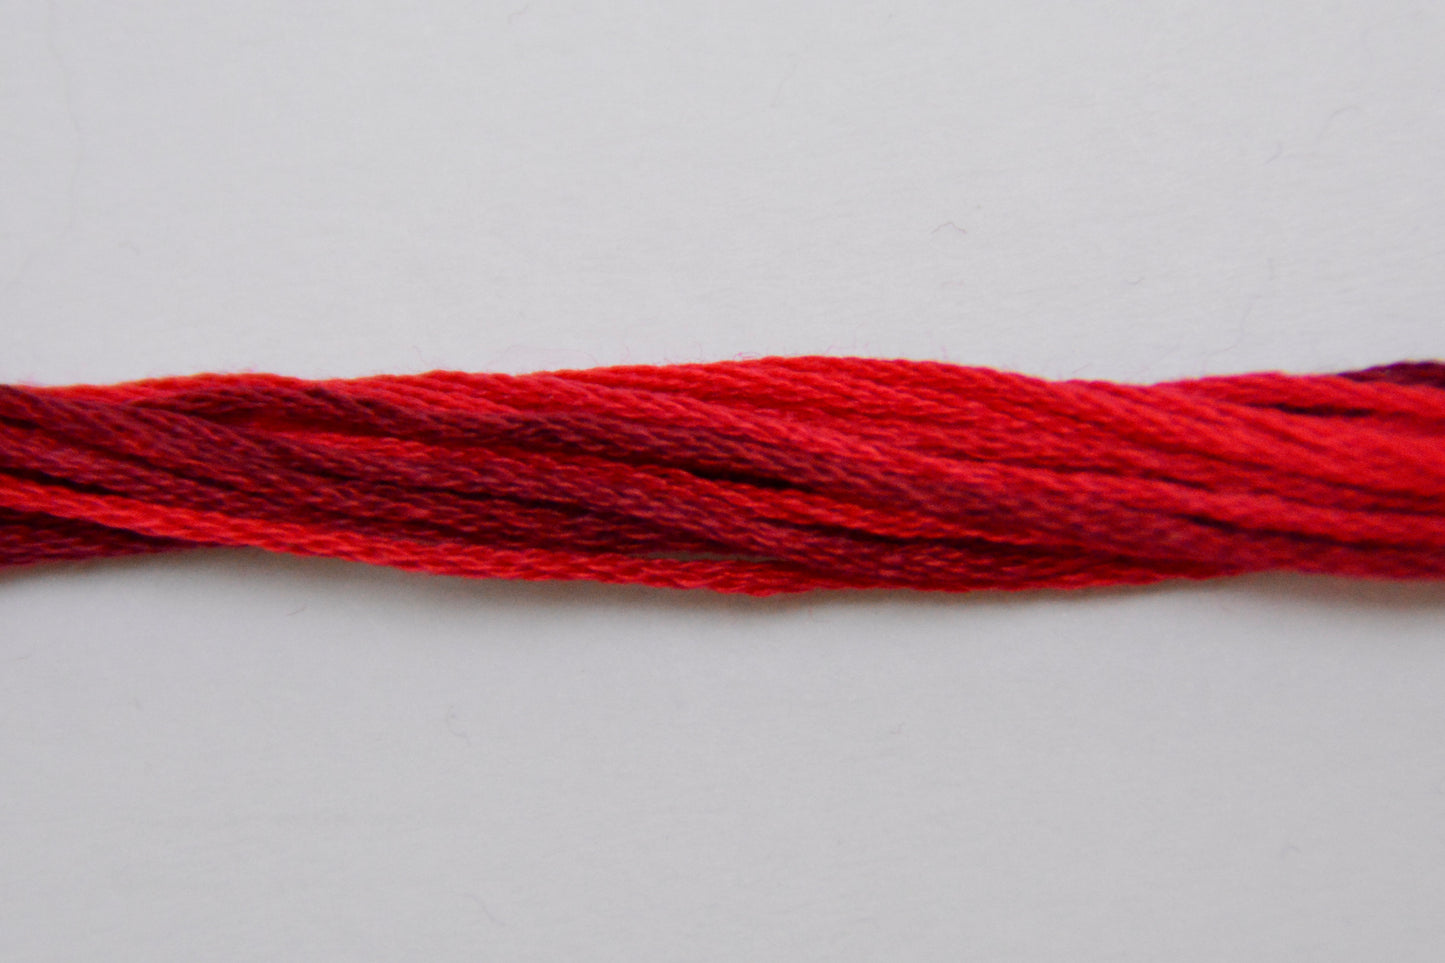 Cupid Classic Colorworks 6 Strand Hand-Dyed Embroidery Floss